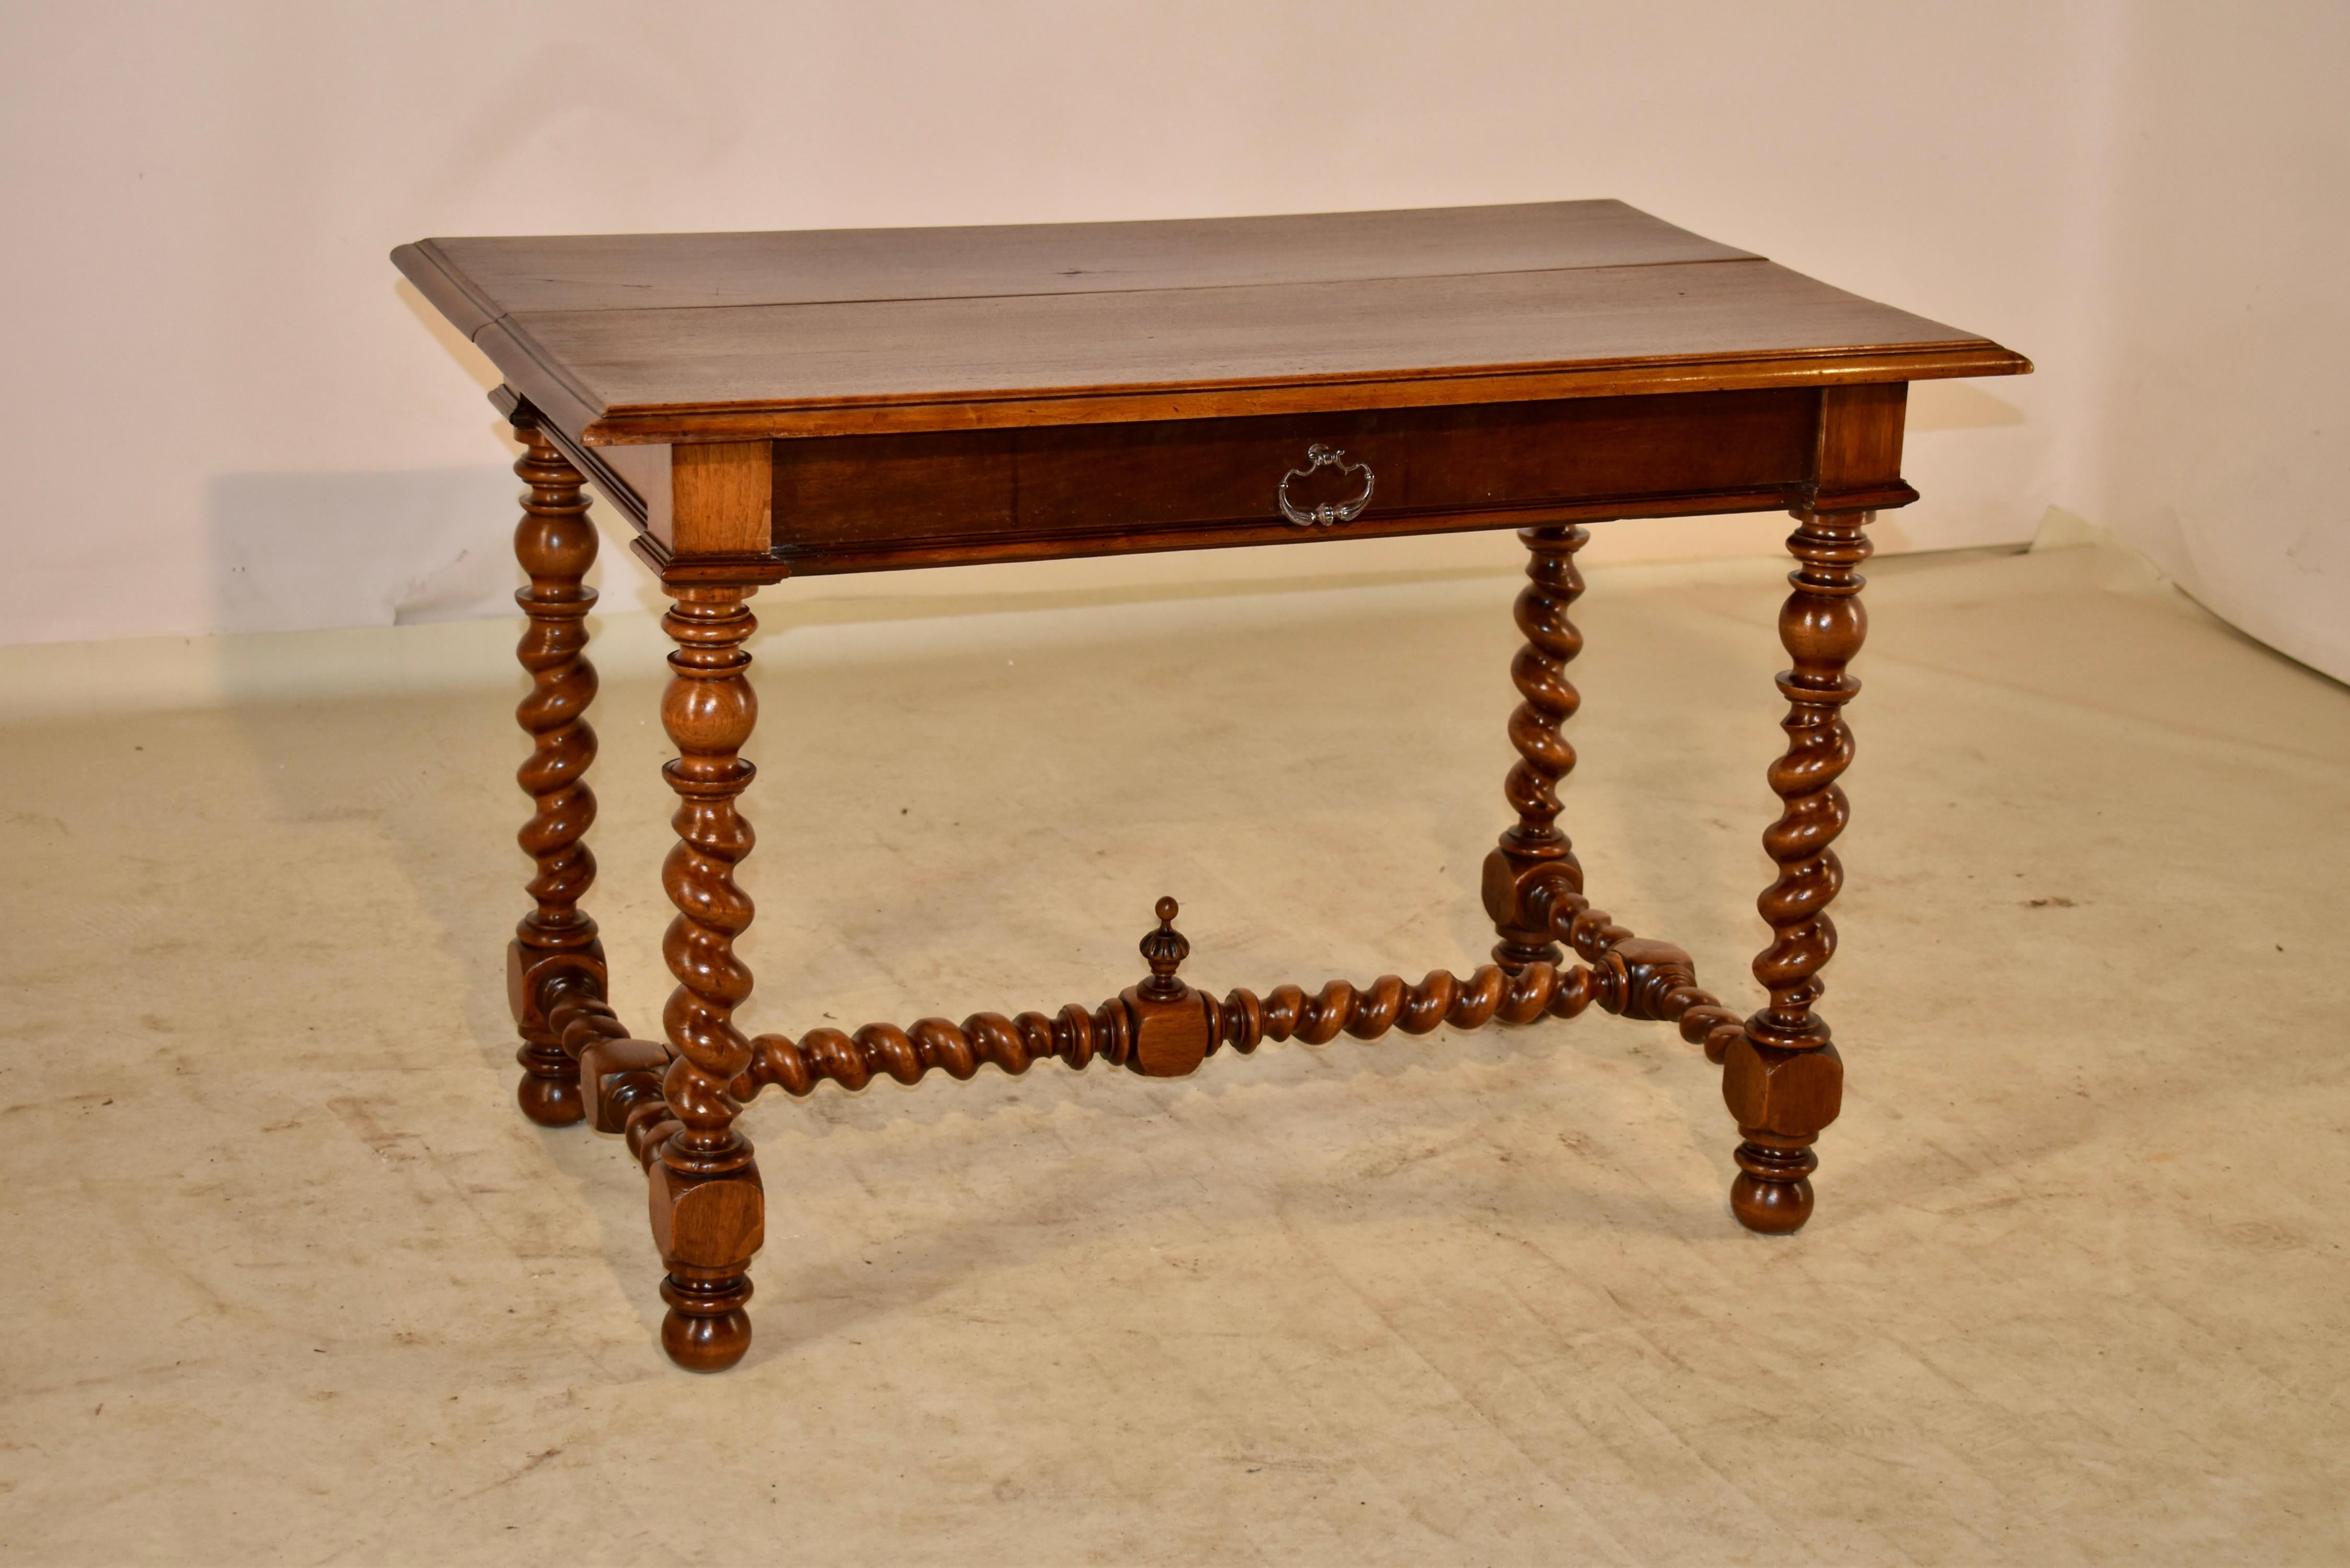 19th Century walnut table from France with a beautifully grained top with a beveled edge, following down to a simple apron containing a single drawer in the front. The table is finished on all four sides for easy placement in any room. the table is